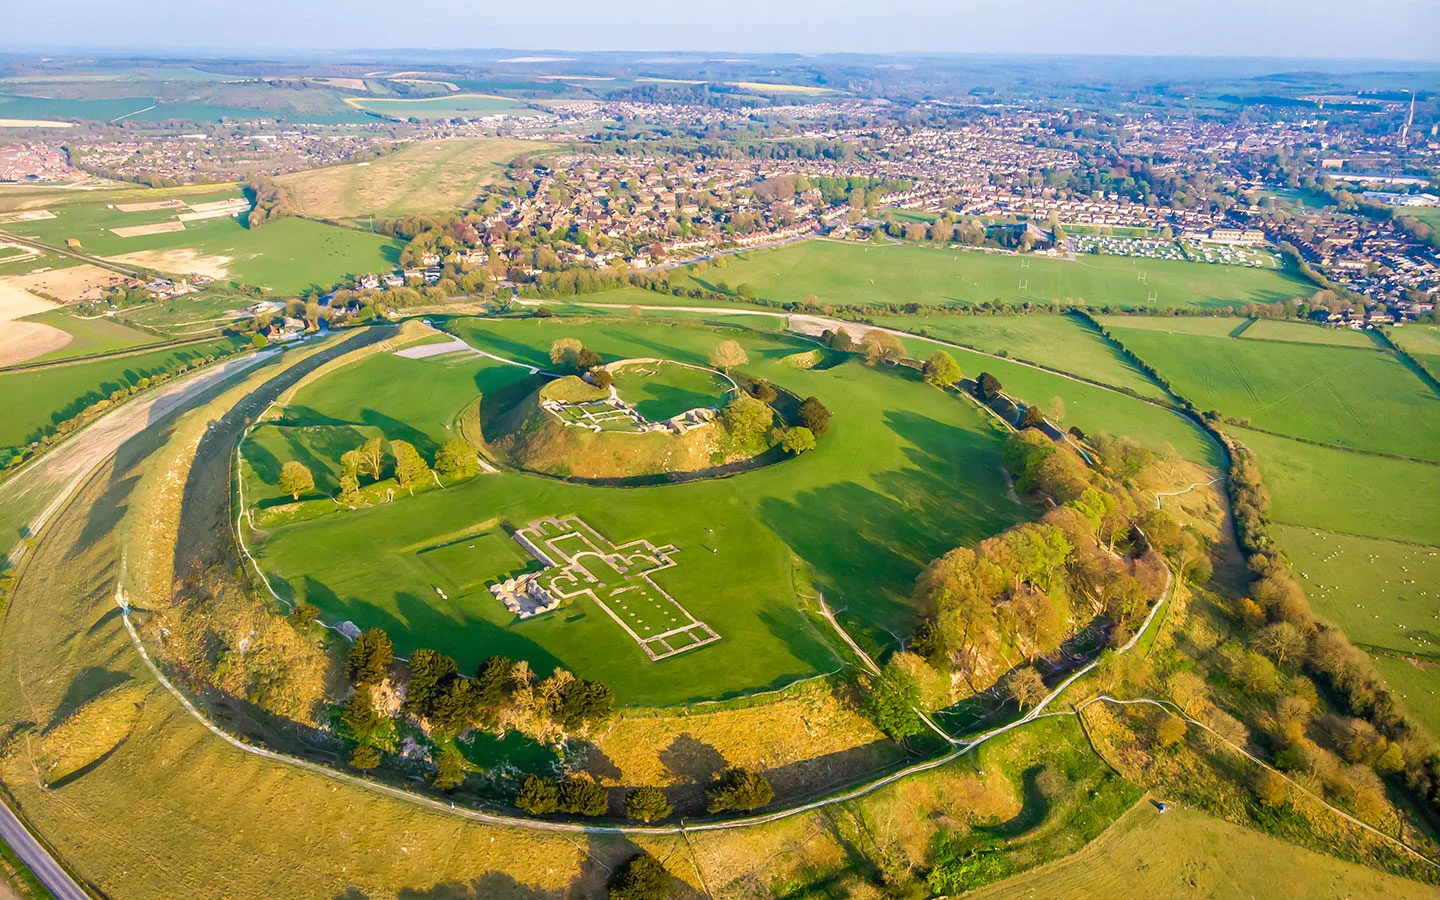 The archaeological site of Old Sarum near Salisbury from above